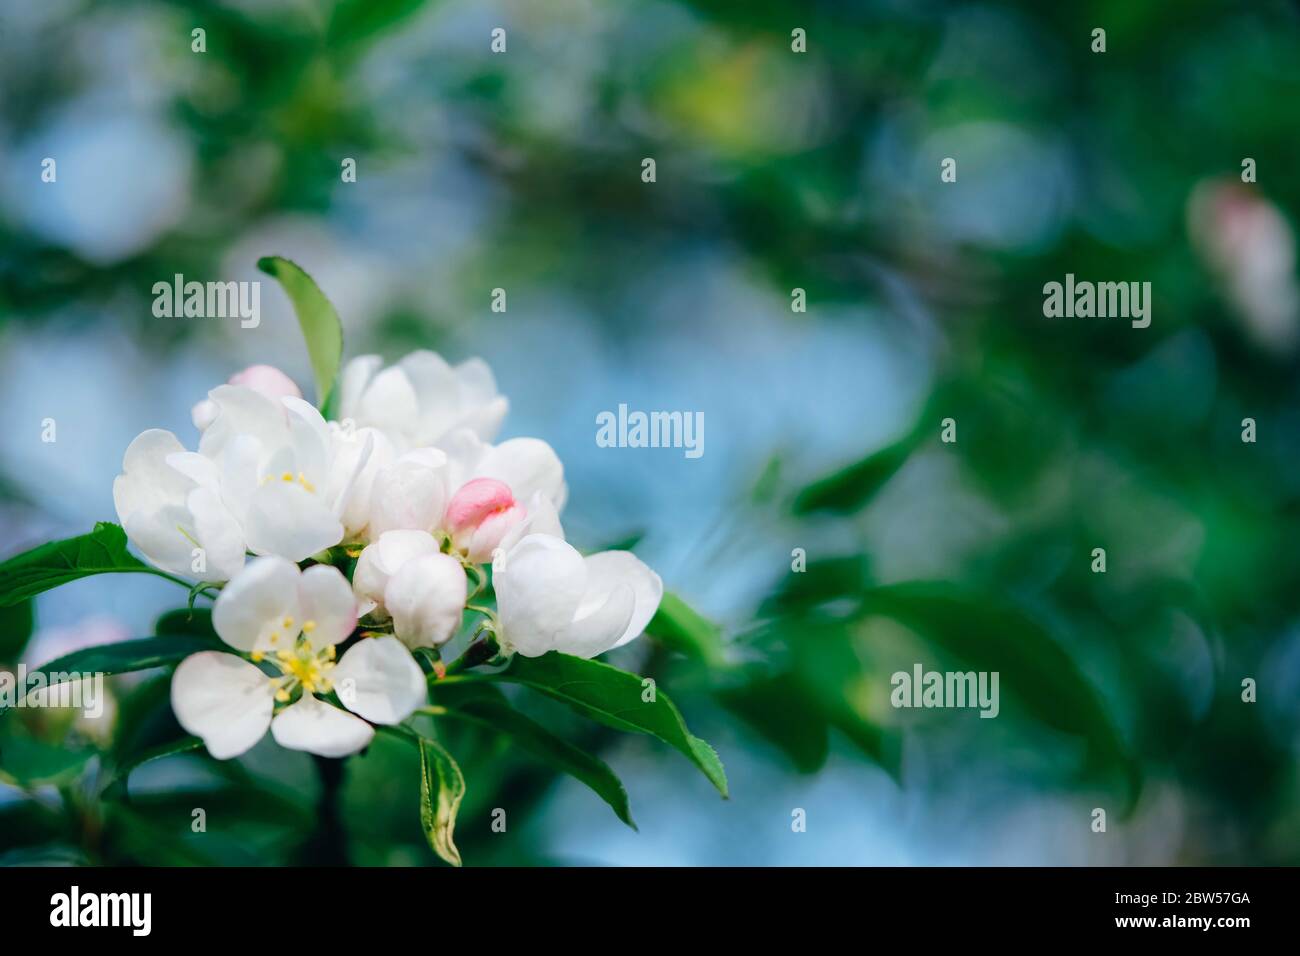 Natural spring blurred background with pink apple blossom buds. Selective focuse, place for text. Stock Photo